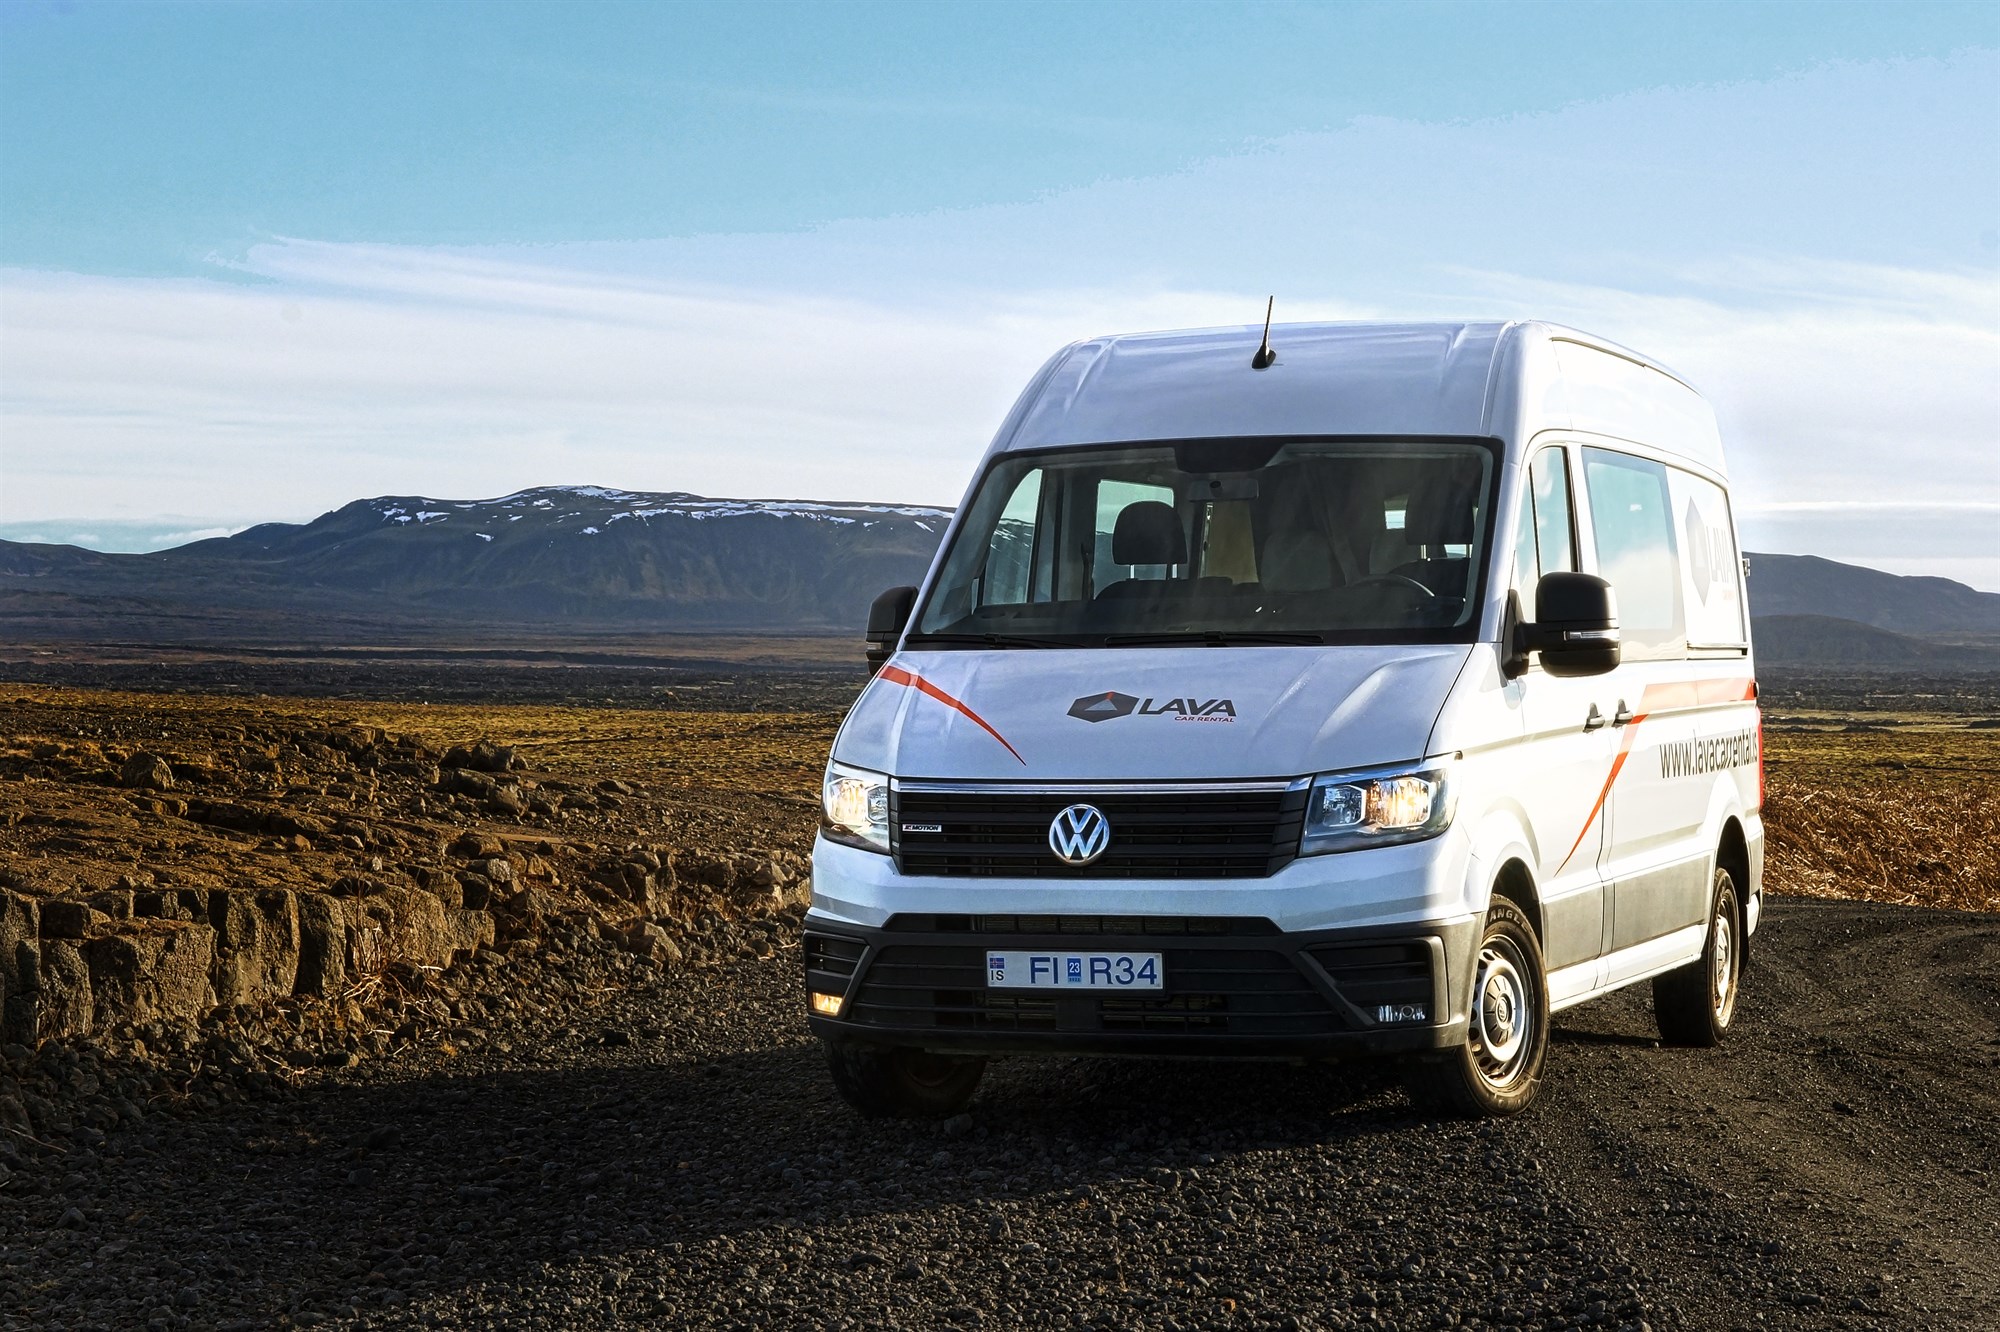 Crafter campervan from Lava in the icelandic nature